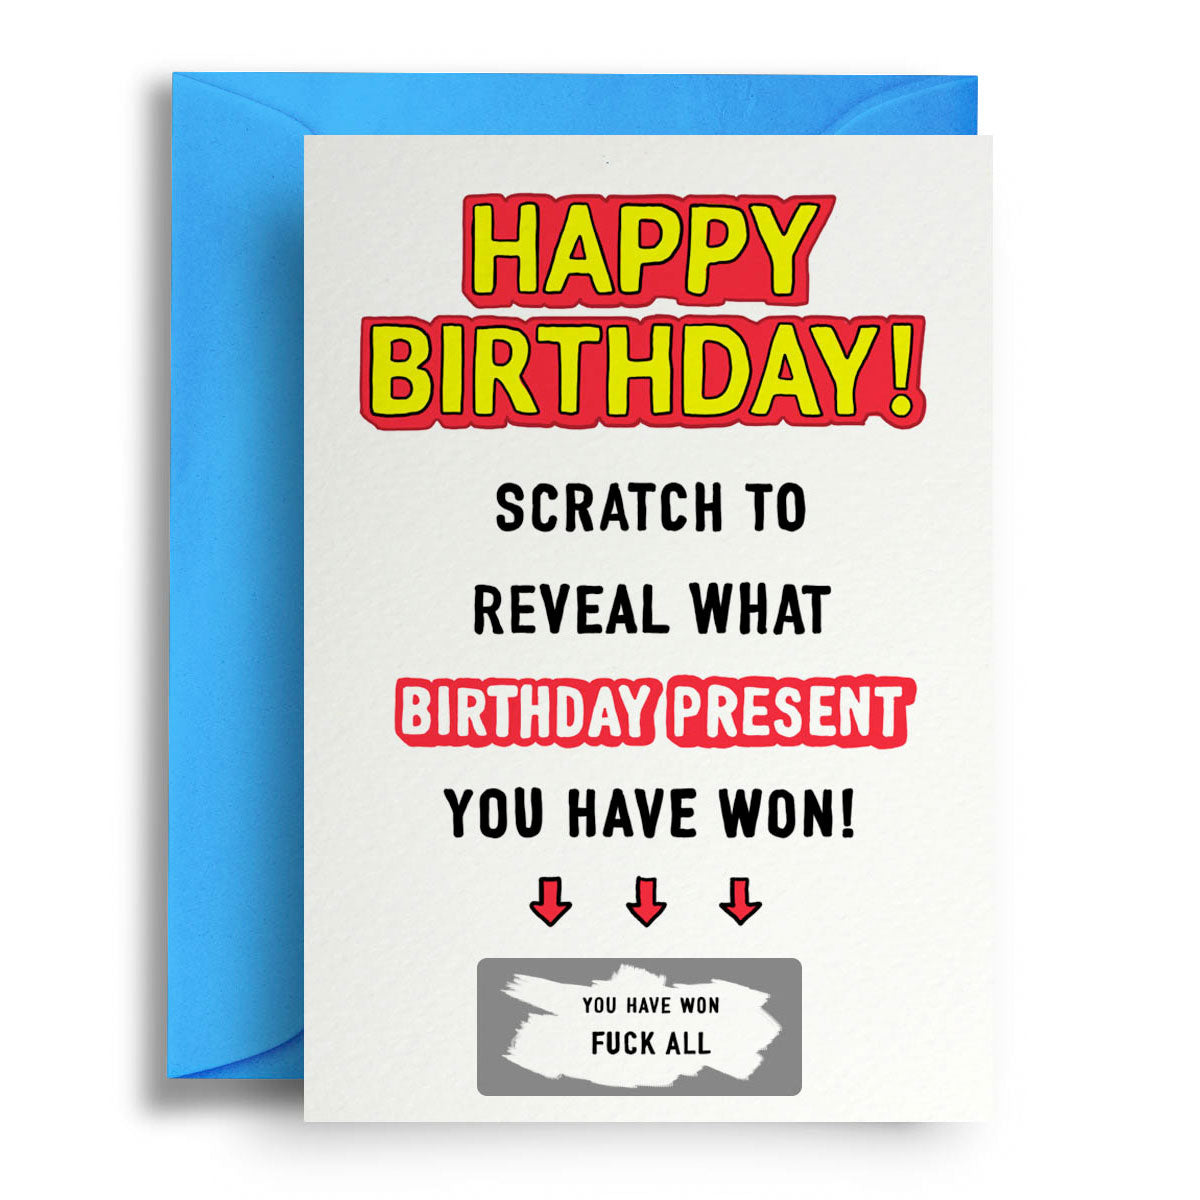 Happy Birthday Scratch To Reveal (F*ck All) - Greetings Card